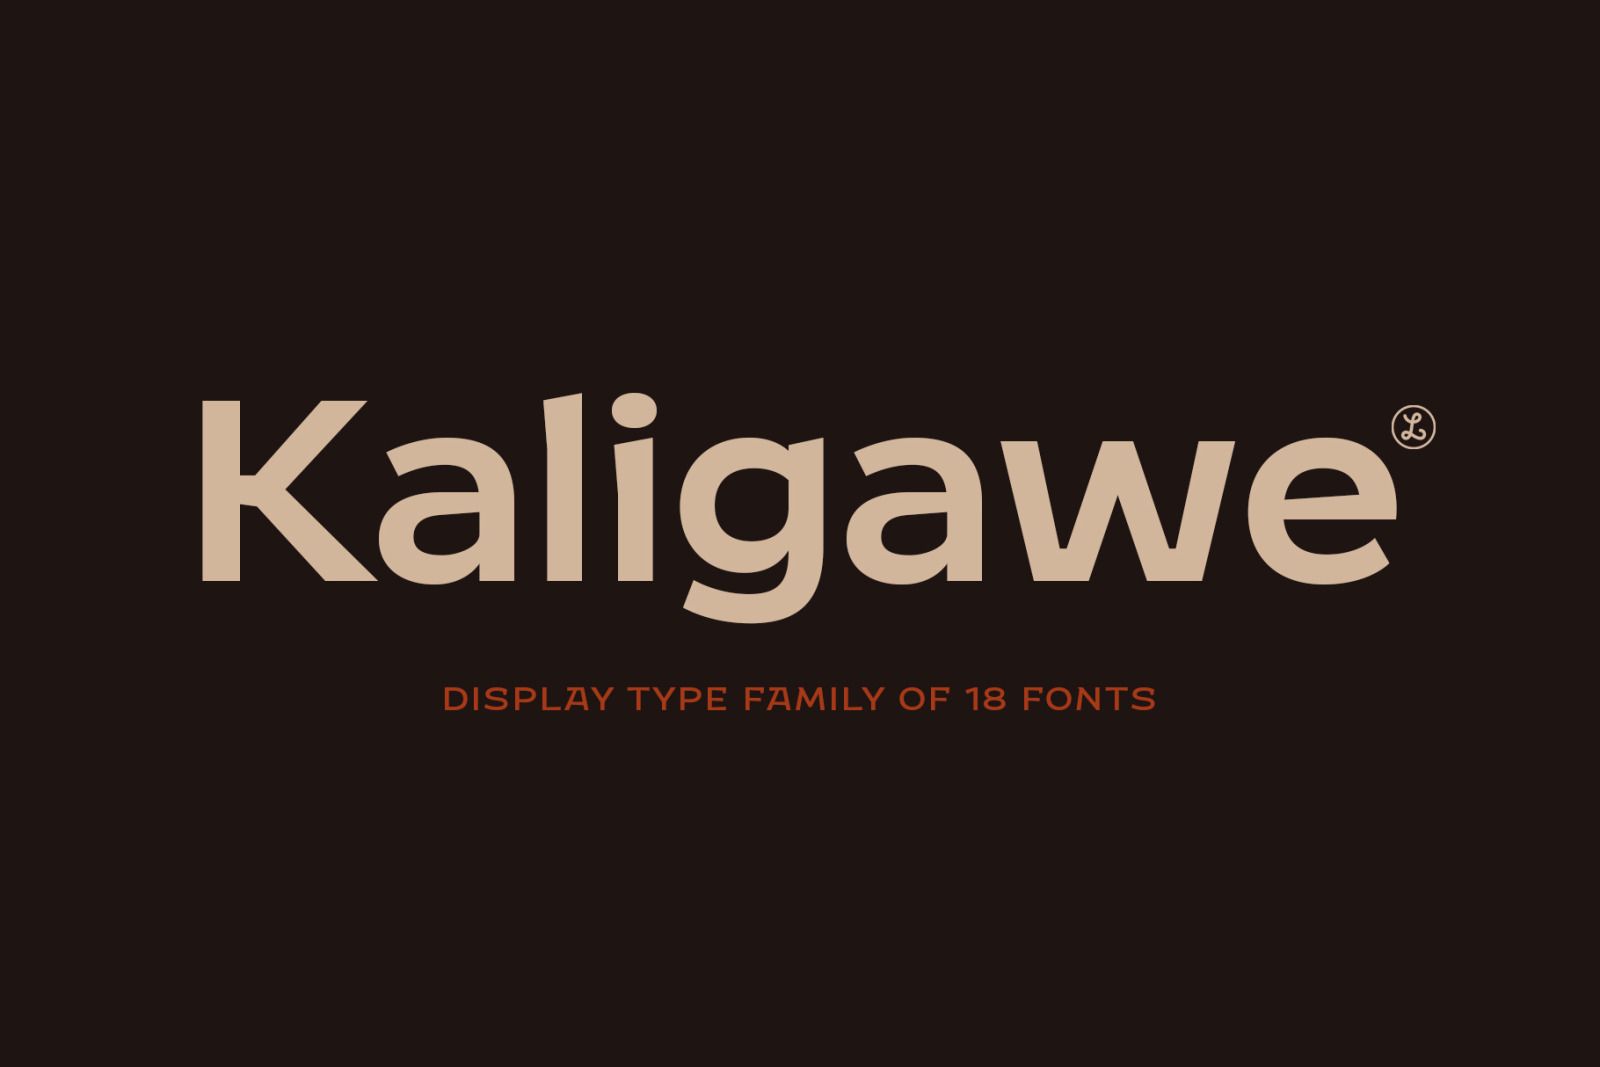 A display type family of eighteen fonts